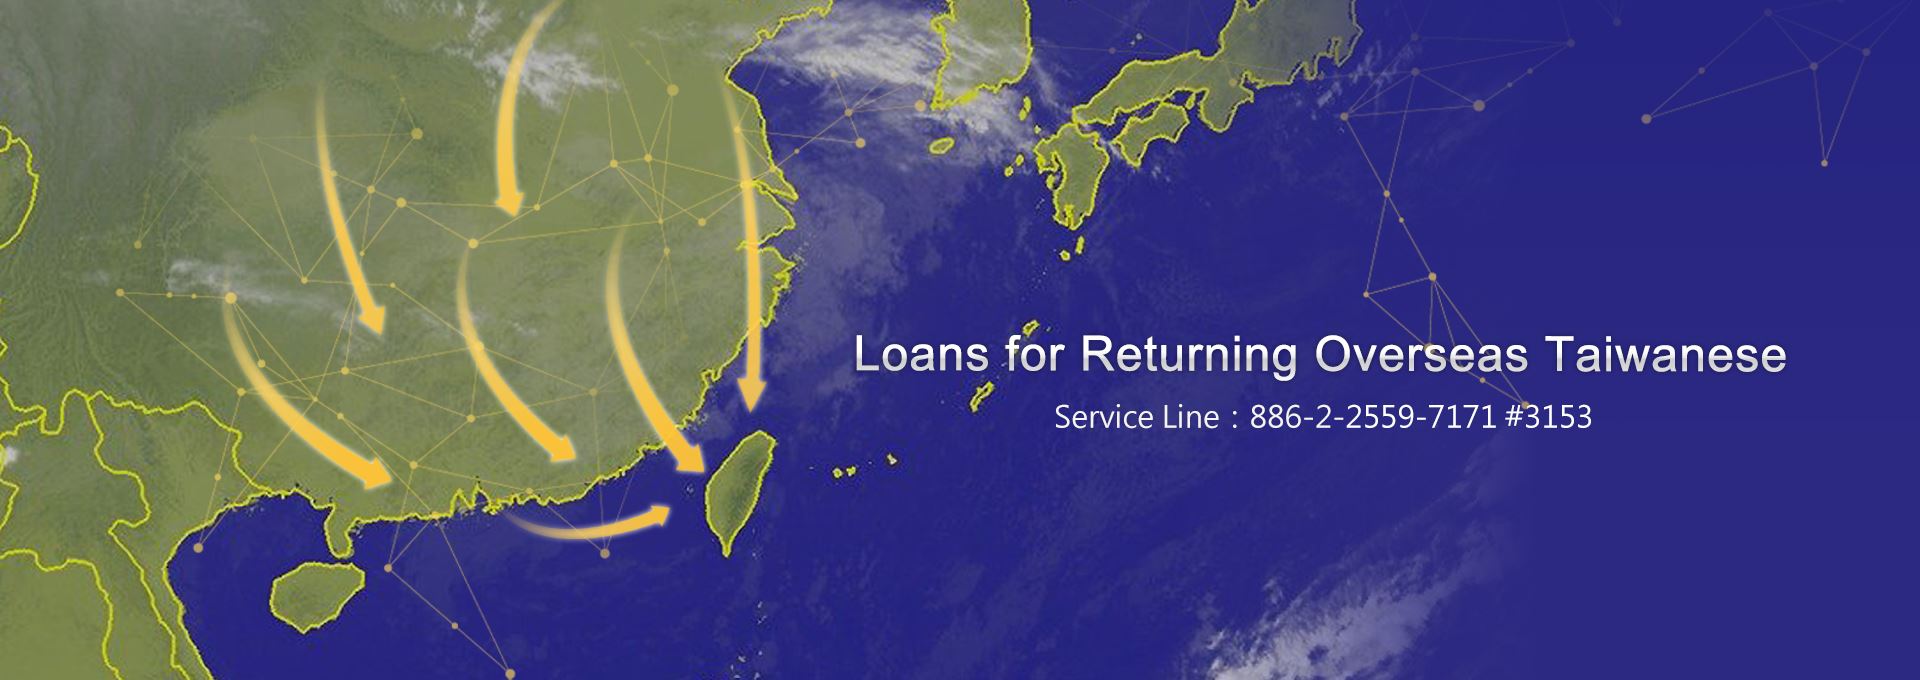 Loans for Returning Overseas Taiwanese Businesses